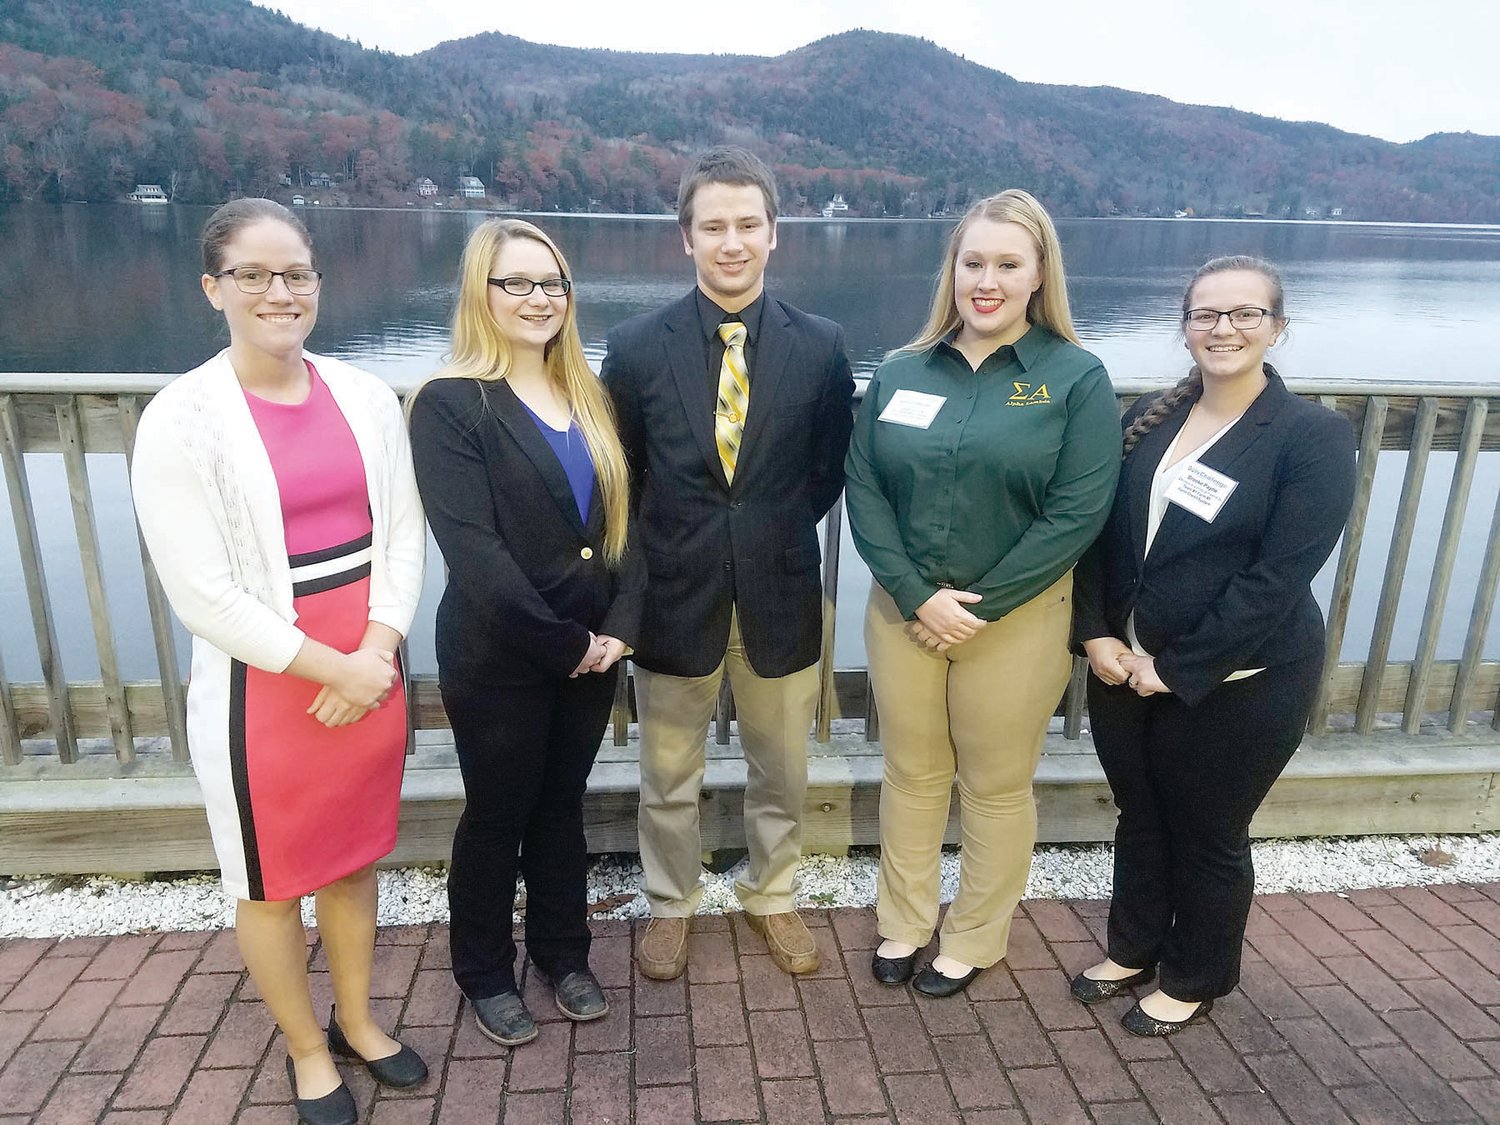 The Delaware Valley University team included, from left, Sam Landers, Amanda Wengryn, Brent Weiss, Caitlyn Denger and Mary (Brooke) Payne. Photograph by NAIDC